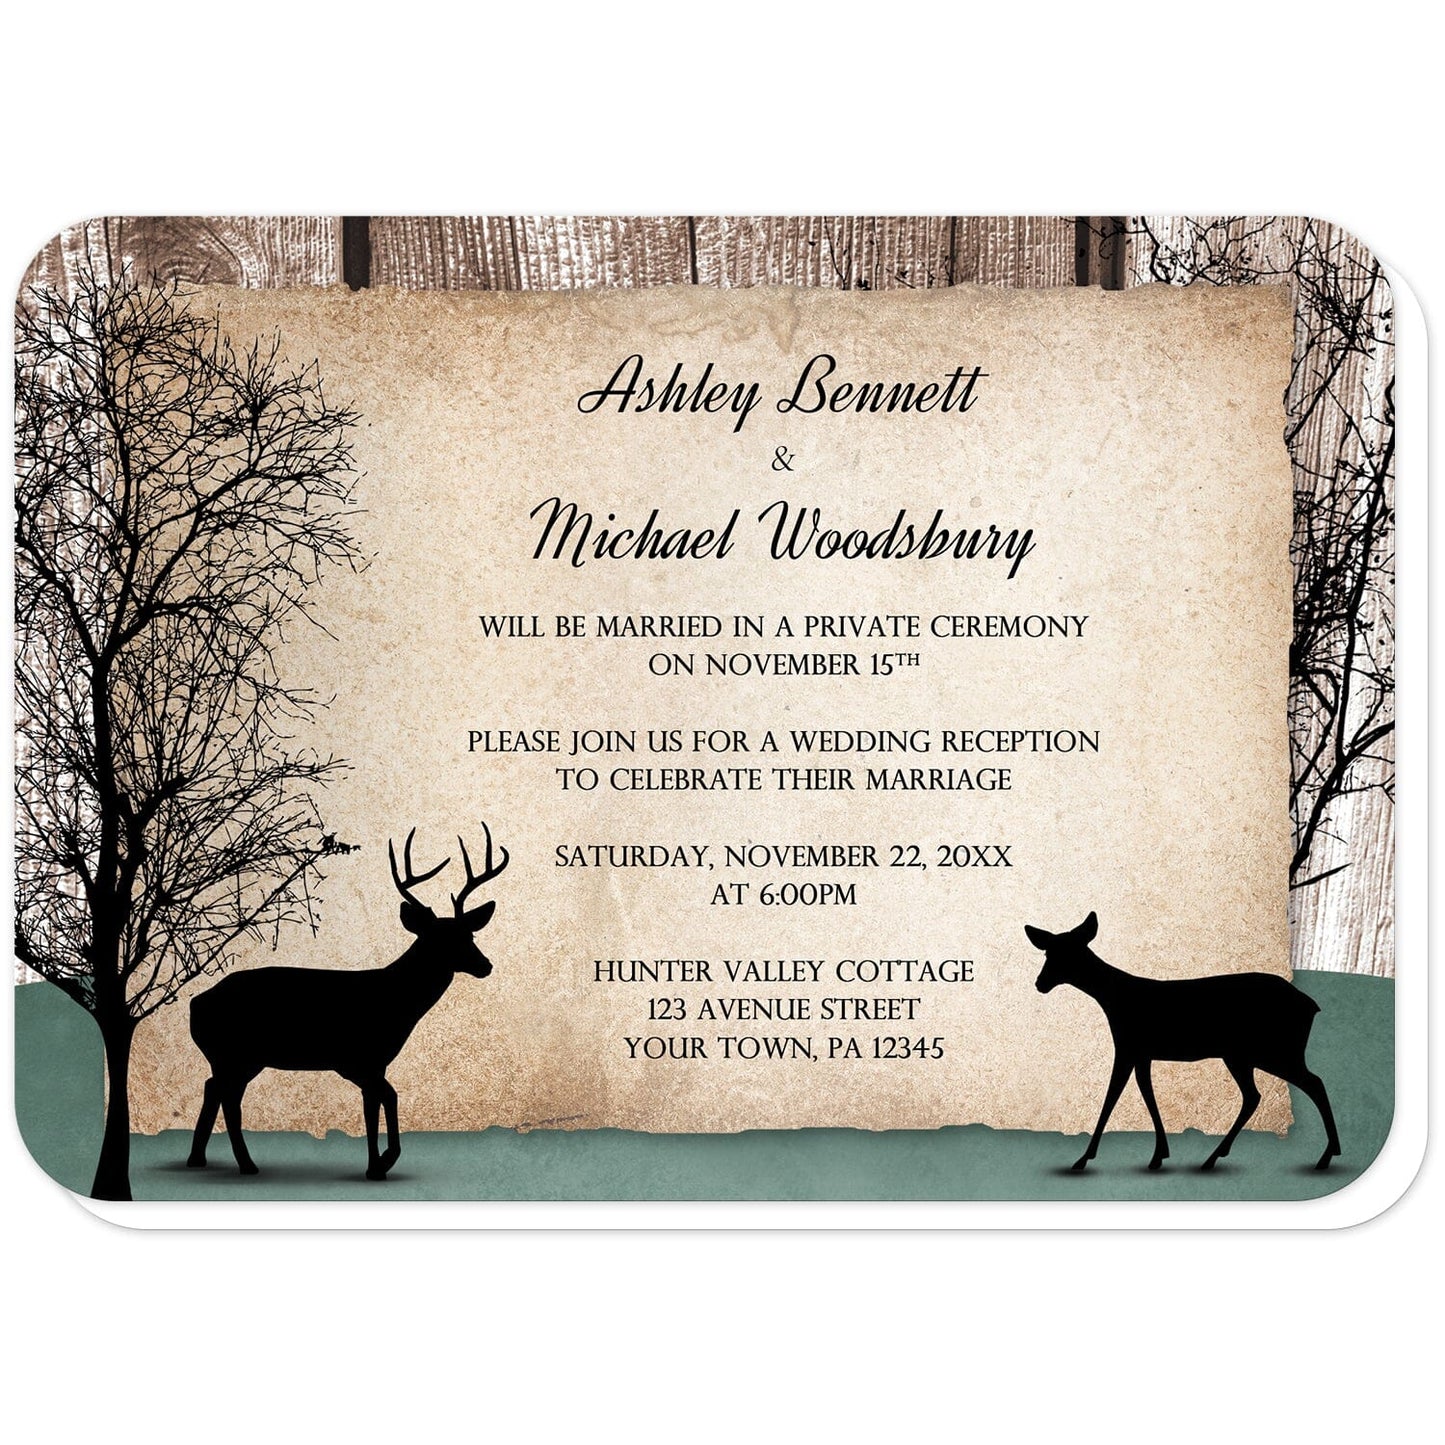 Rustic Woodsy Deer Reception Only Invitations (with rounded corners) at Artistically Invited. Rustic woodsy deer reception only invitations designed with silhouettes of a buck deer with antlers, a doe, and winter trees over a wood brown background and a faded hunter green design along the bottom. Your personalized post-wedding reception details are custom printed in black over a tattered rustic paper illustration between the deer.